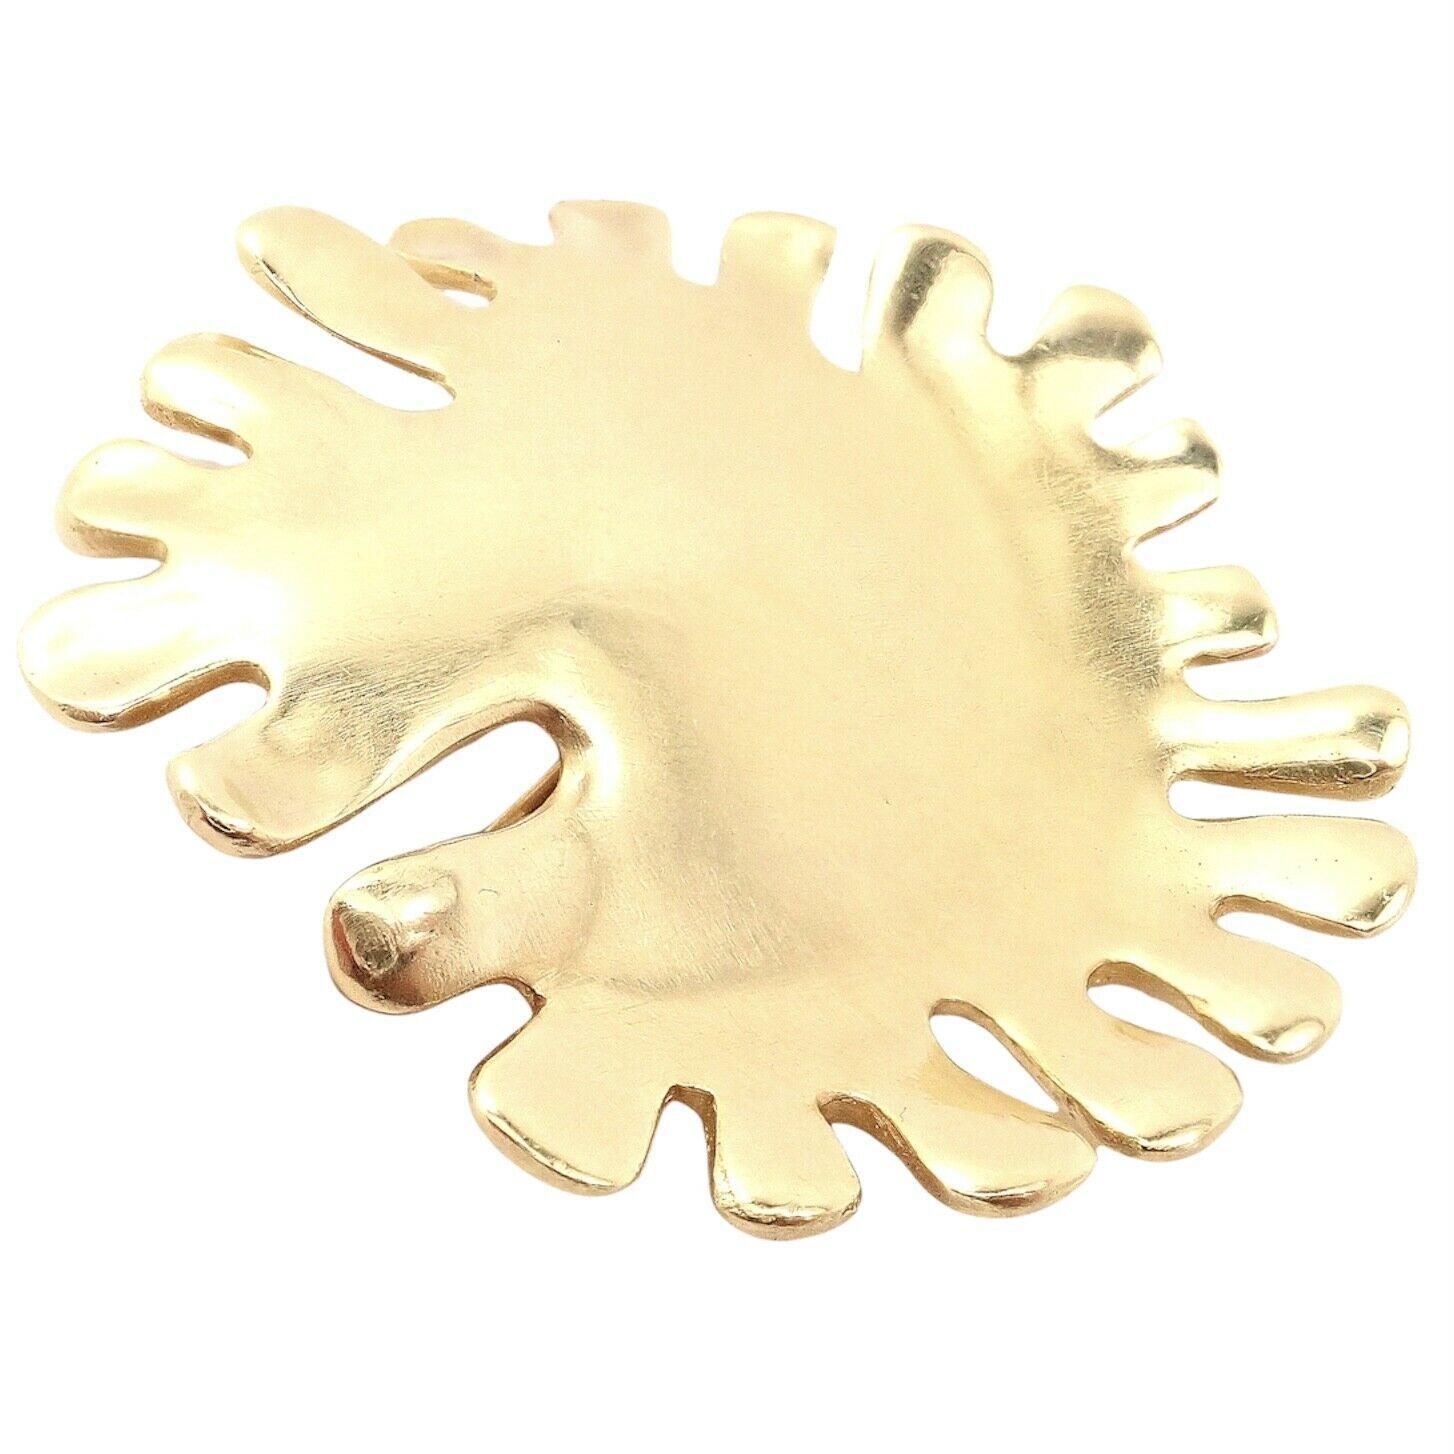 18k Yellow Gold Nickelodeon Abstract Brooch by Angela Cummings for Tiffany & Co. 
Details: 
Measurements: 38mm x 38mm
Weight: 15.2 grams
Stamped Hallmarks: T&Co 18k 1981
YOUR PRICE: $3,250
Ti834mloe